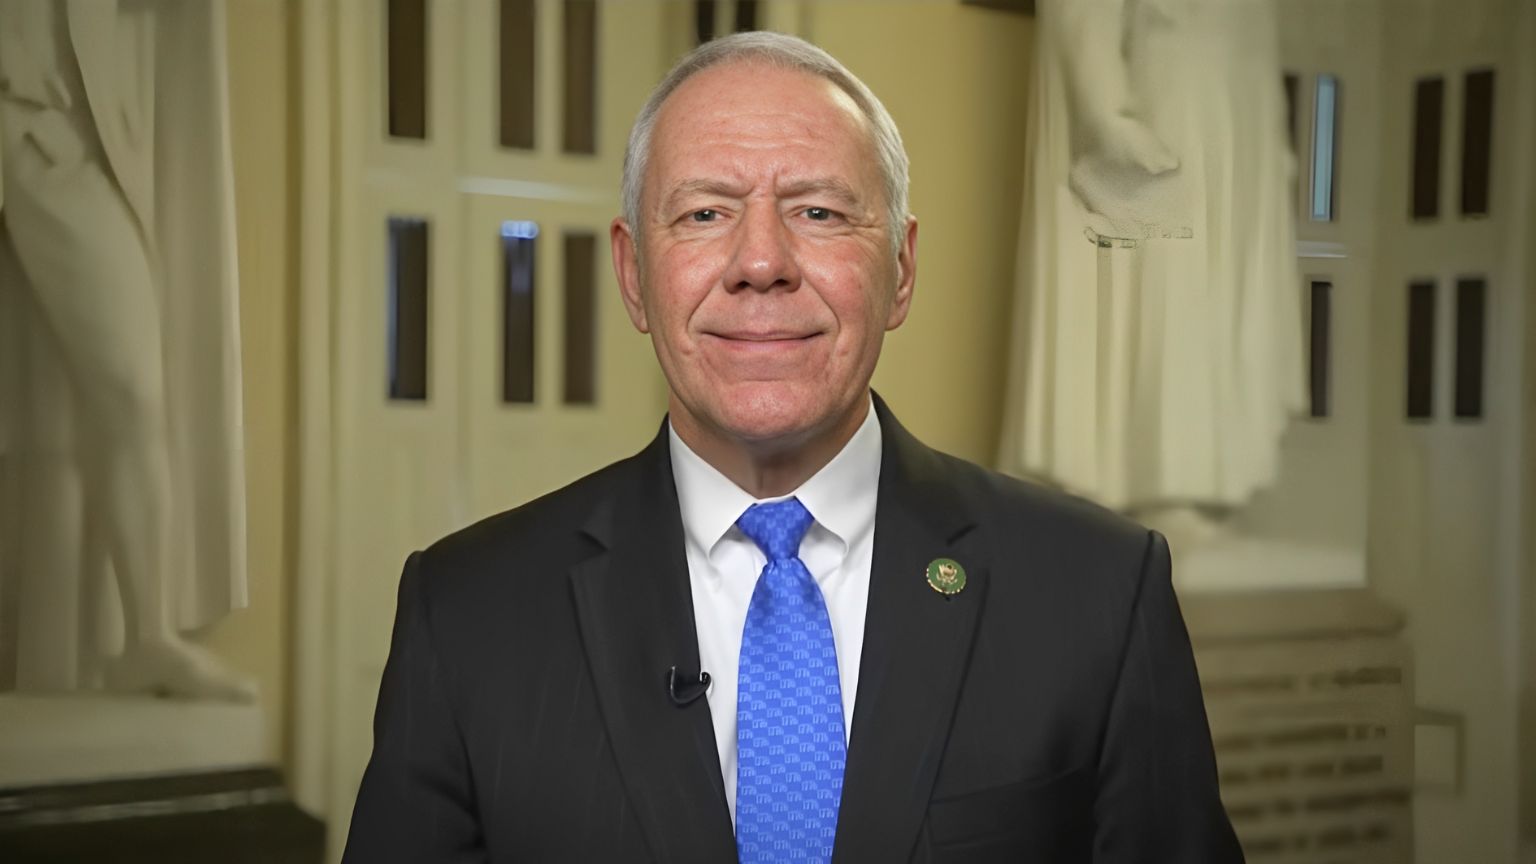 Rep. Ken Buck says Google is the “greatest threat to speech in the market”